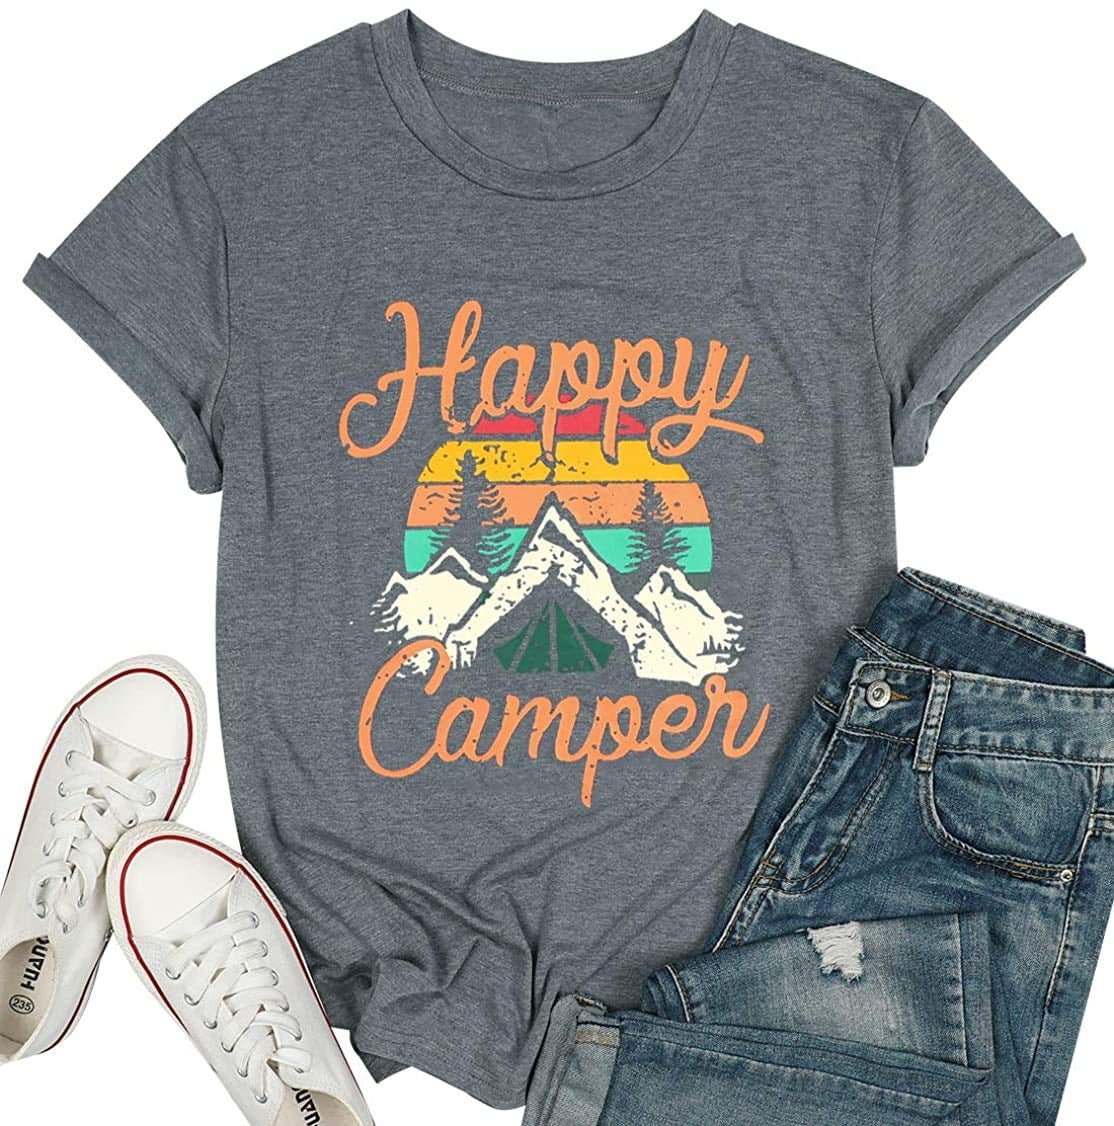 Women Happy Camper Funny Cute Camper Tee Shirts Graphic Letter Print Tee Shirts